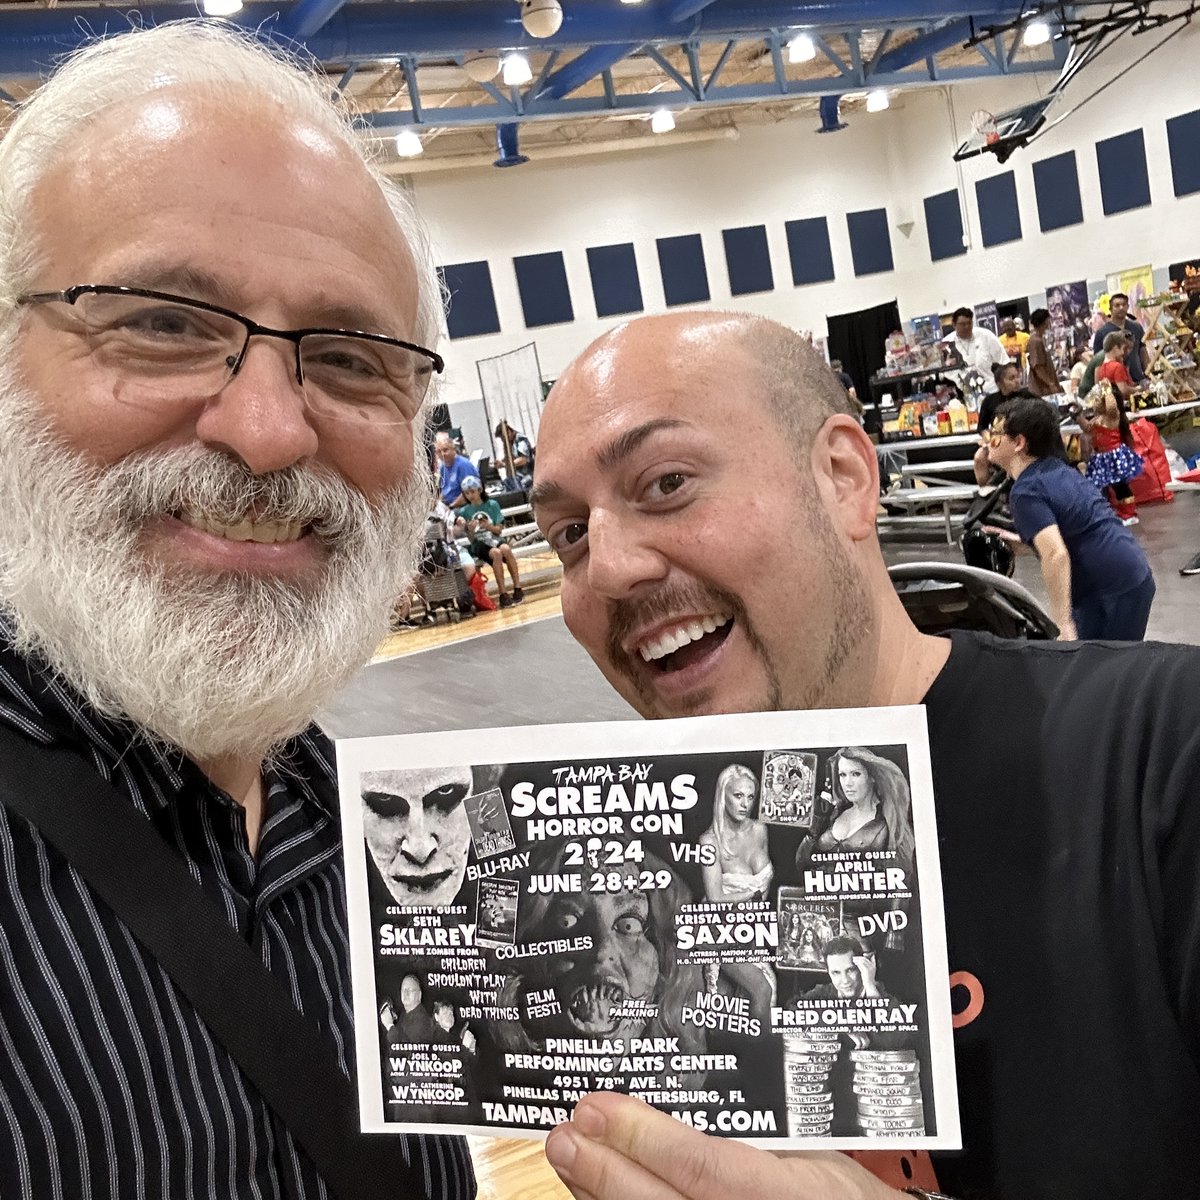 Tampa Bay Screams founder Sean Donohue bumps into the new TBS guy at a local con! Get ready for June, 2024 Tampa Bay Screams with Michelle Bauer, Fred Olen Ray, and more Guest Announcements coming soon! Like | Comment | Share tampabayscreams.com/tickets